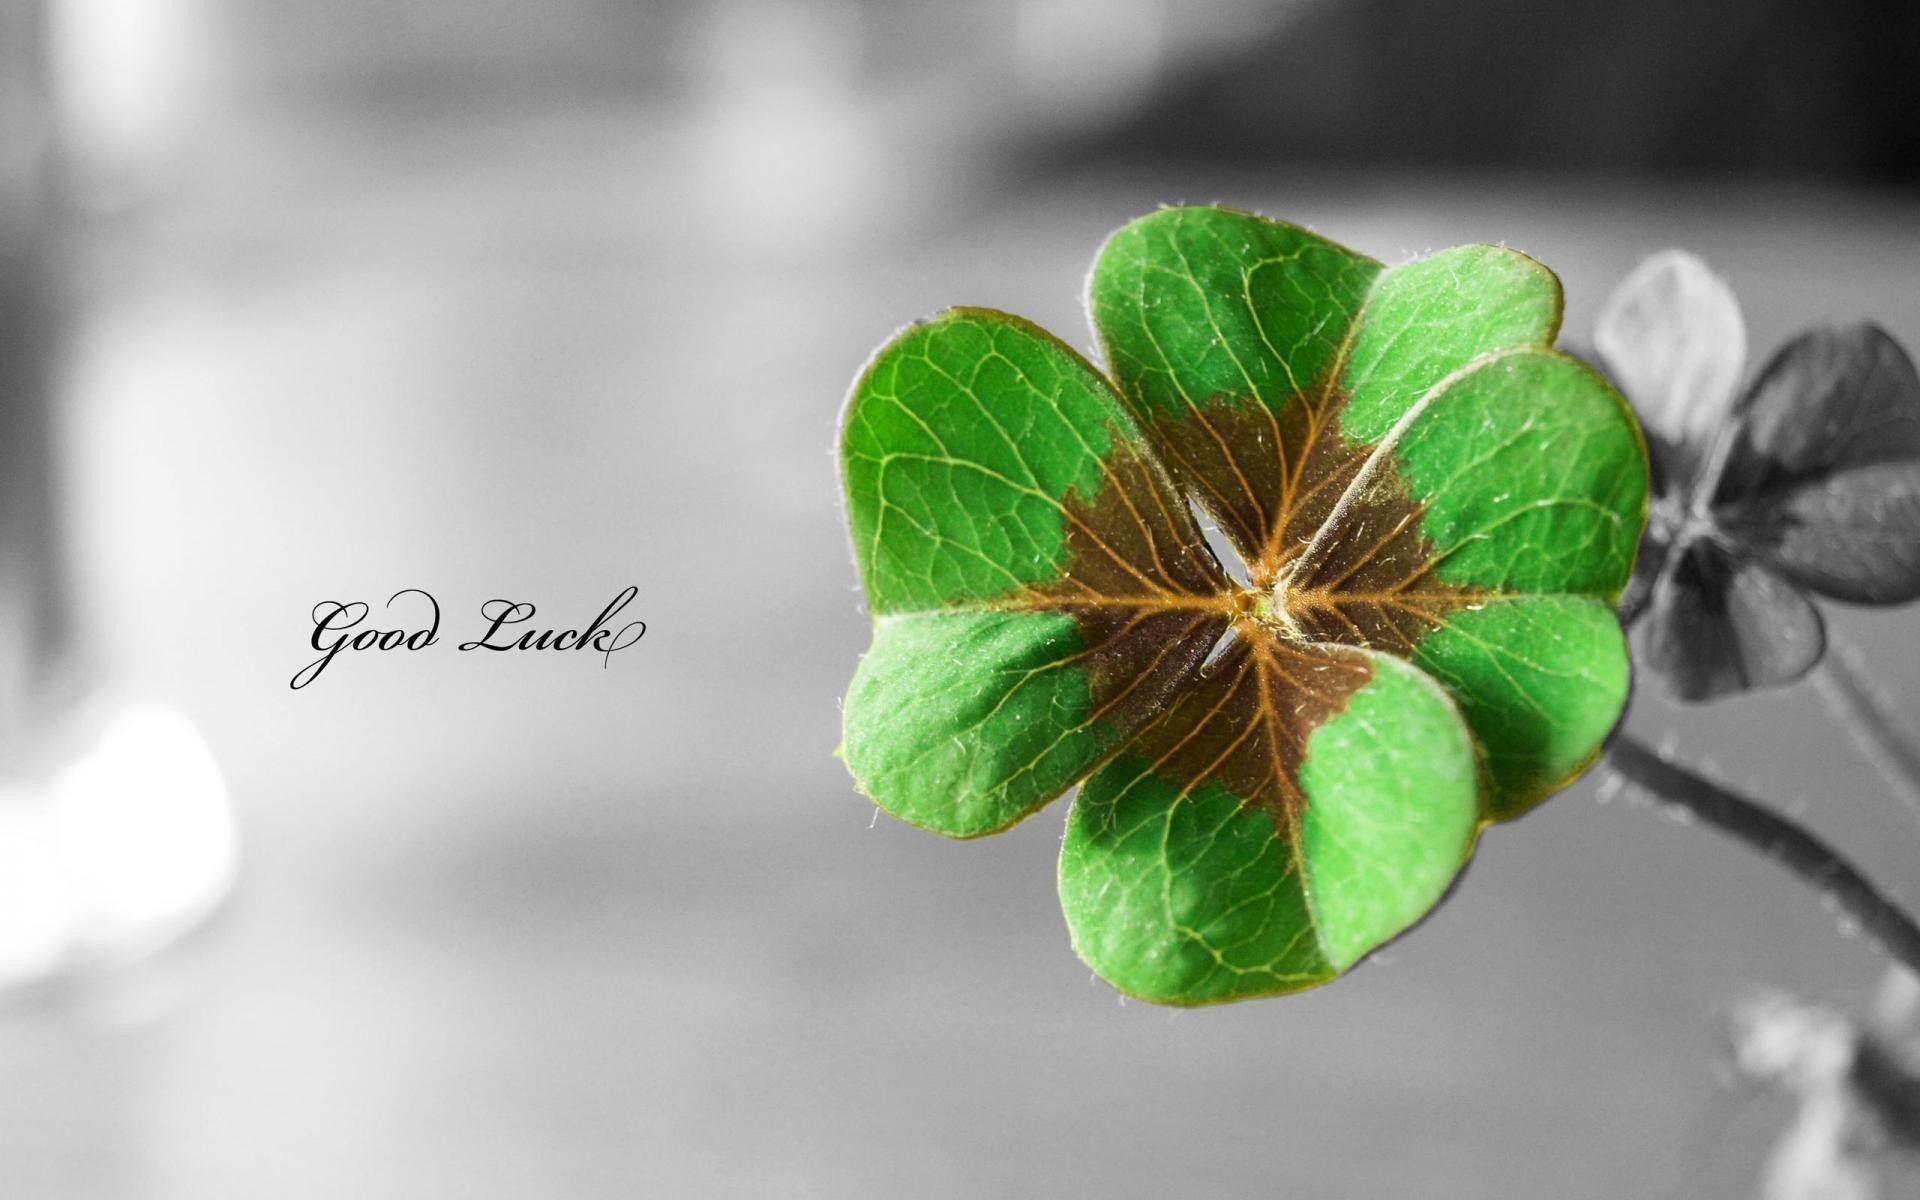 The Leaves Of Four Leaf Clovers As A Lucky #charm Can Stand